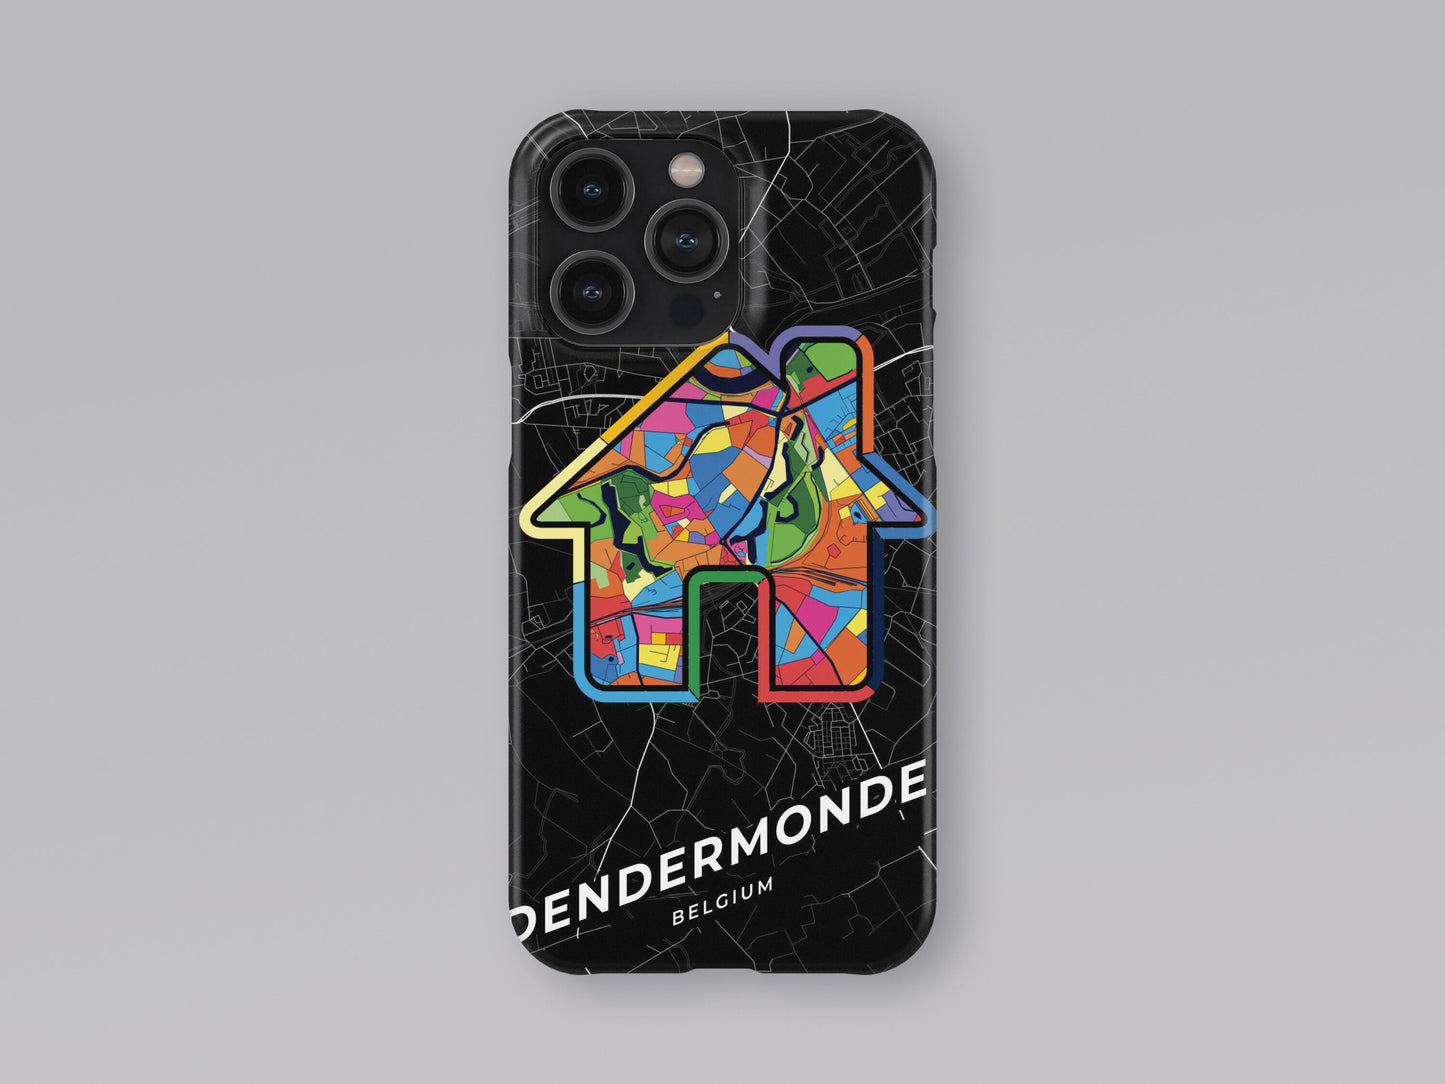 Dendermonde Belgium slim phone case with colorful icon. Birthday, wedding or housewarming gift. Couple match cases. 3